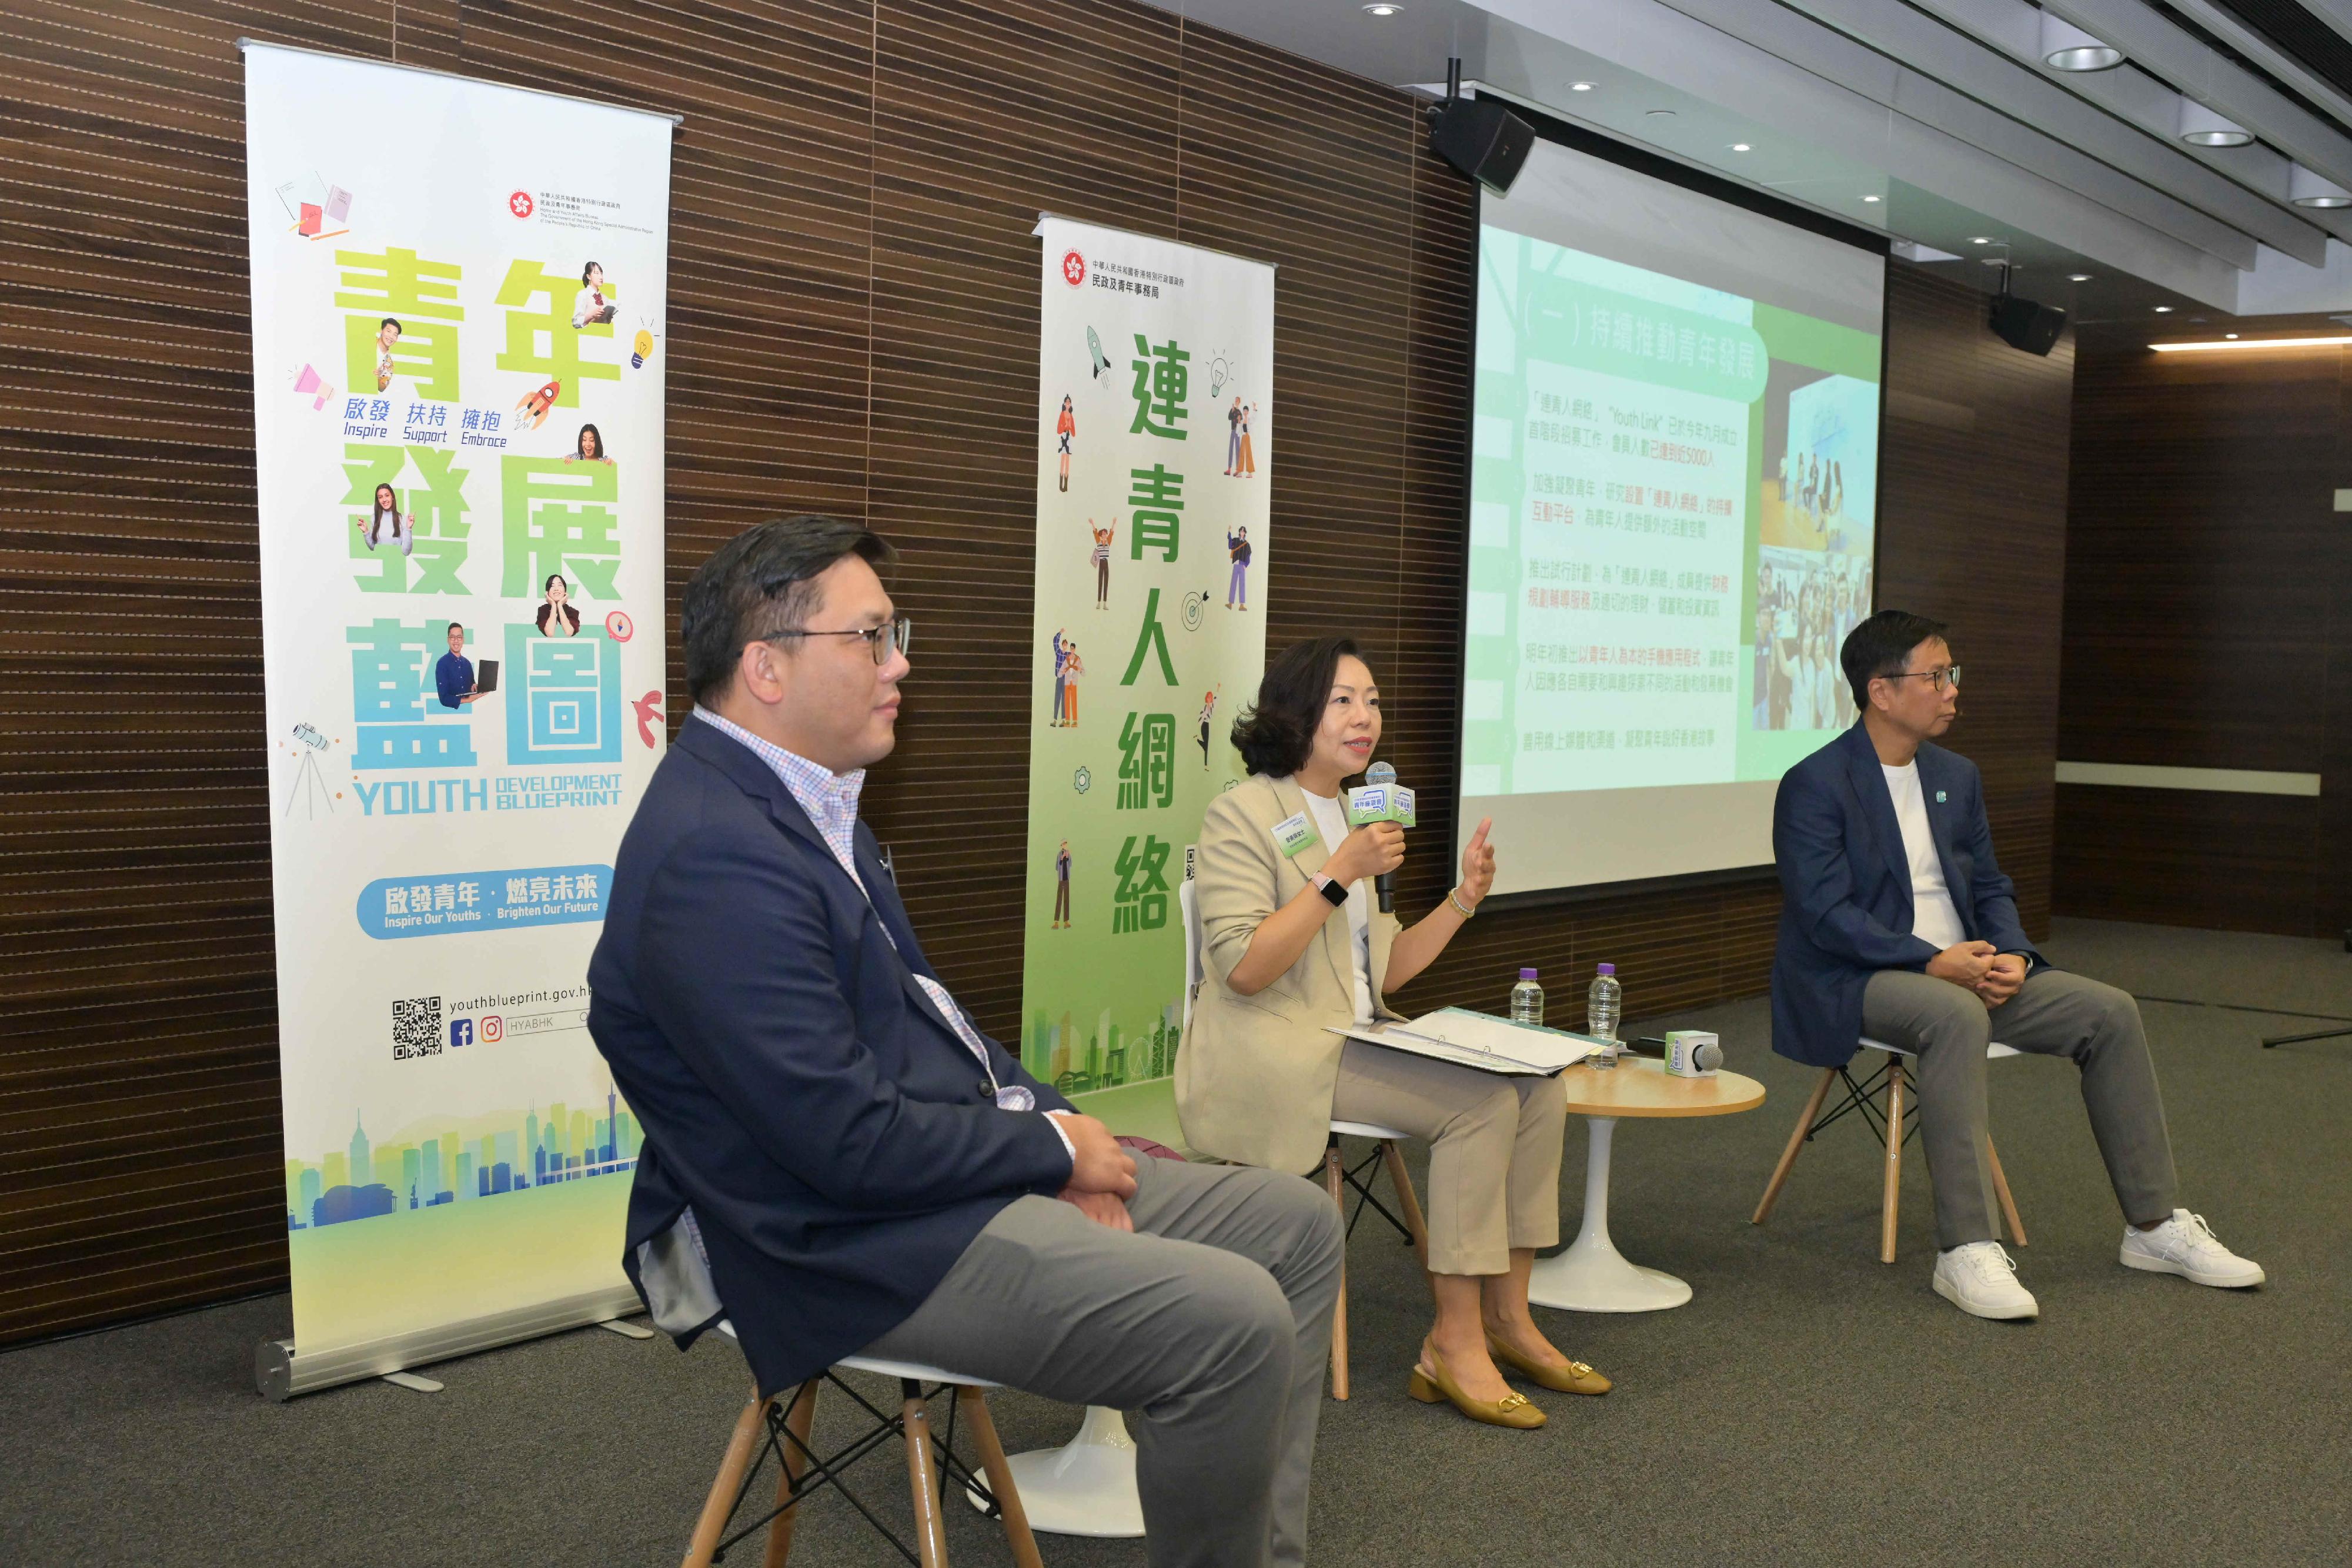 The Secretary for Home and Youth Affairs, Miss Alice Mak (centre); the Under Secretary for Home and Youth Affairs, Mr Clarence Leung (left), and the Commissioner for Youth, Mr Eric Chan (right), attended the Youth Dialogue on "The Chief Executive’s 2023 Policy Address" organised for members of the Youth Link today (November 4). They introduced the policy measures related to the Home and Youth Affairs Bureau, which were recently announced in the Policy Address, to over 40 young people. Photo shows Miss Mak (centre) speaking at the event.